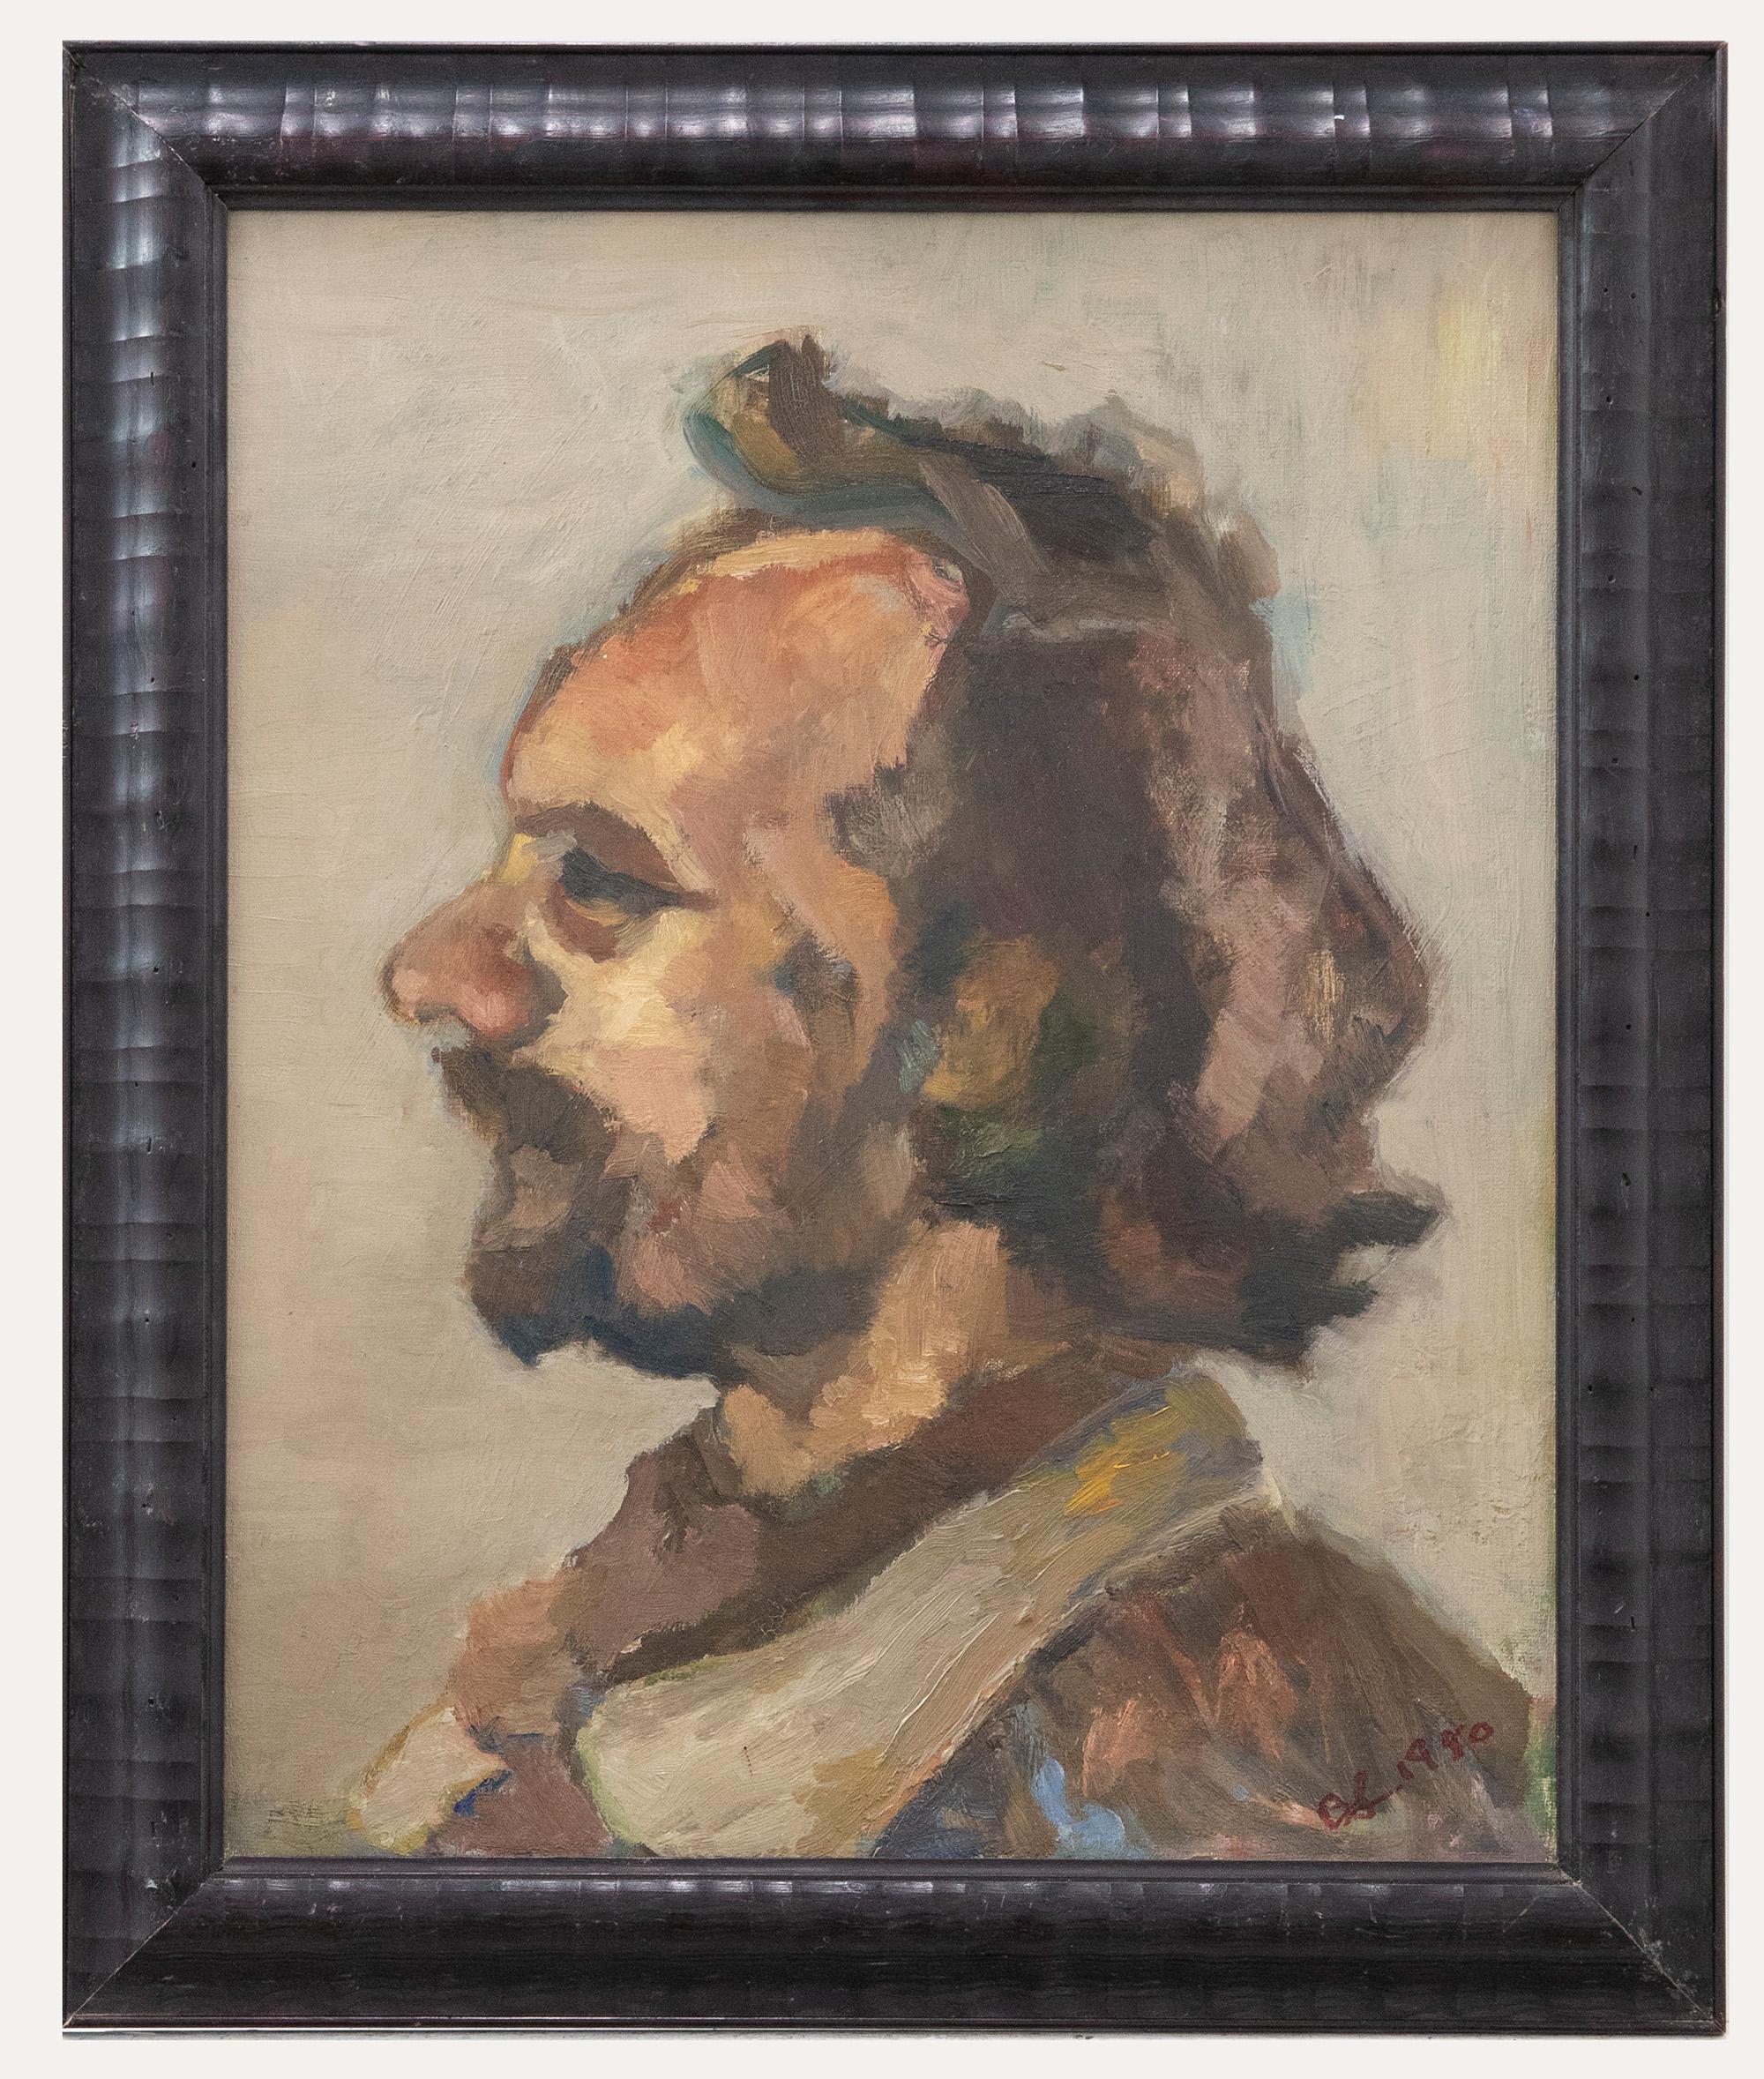 A wonderful portrait of a gentleman in profile. Completed with expressive brushwork and areas of impasto. Very well presented in a dark wood frame. Signed and dated. On board.
